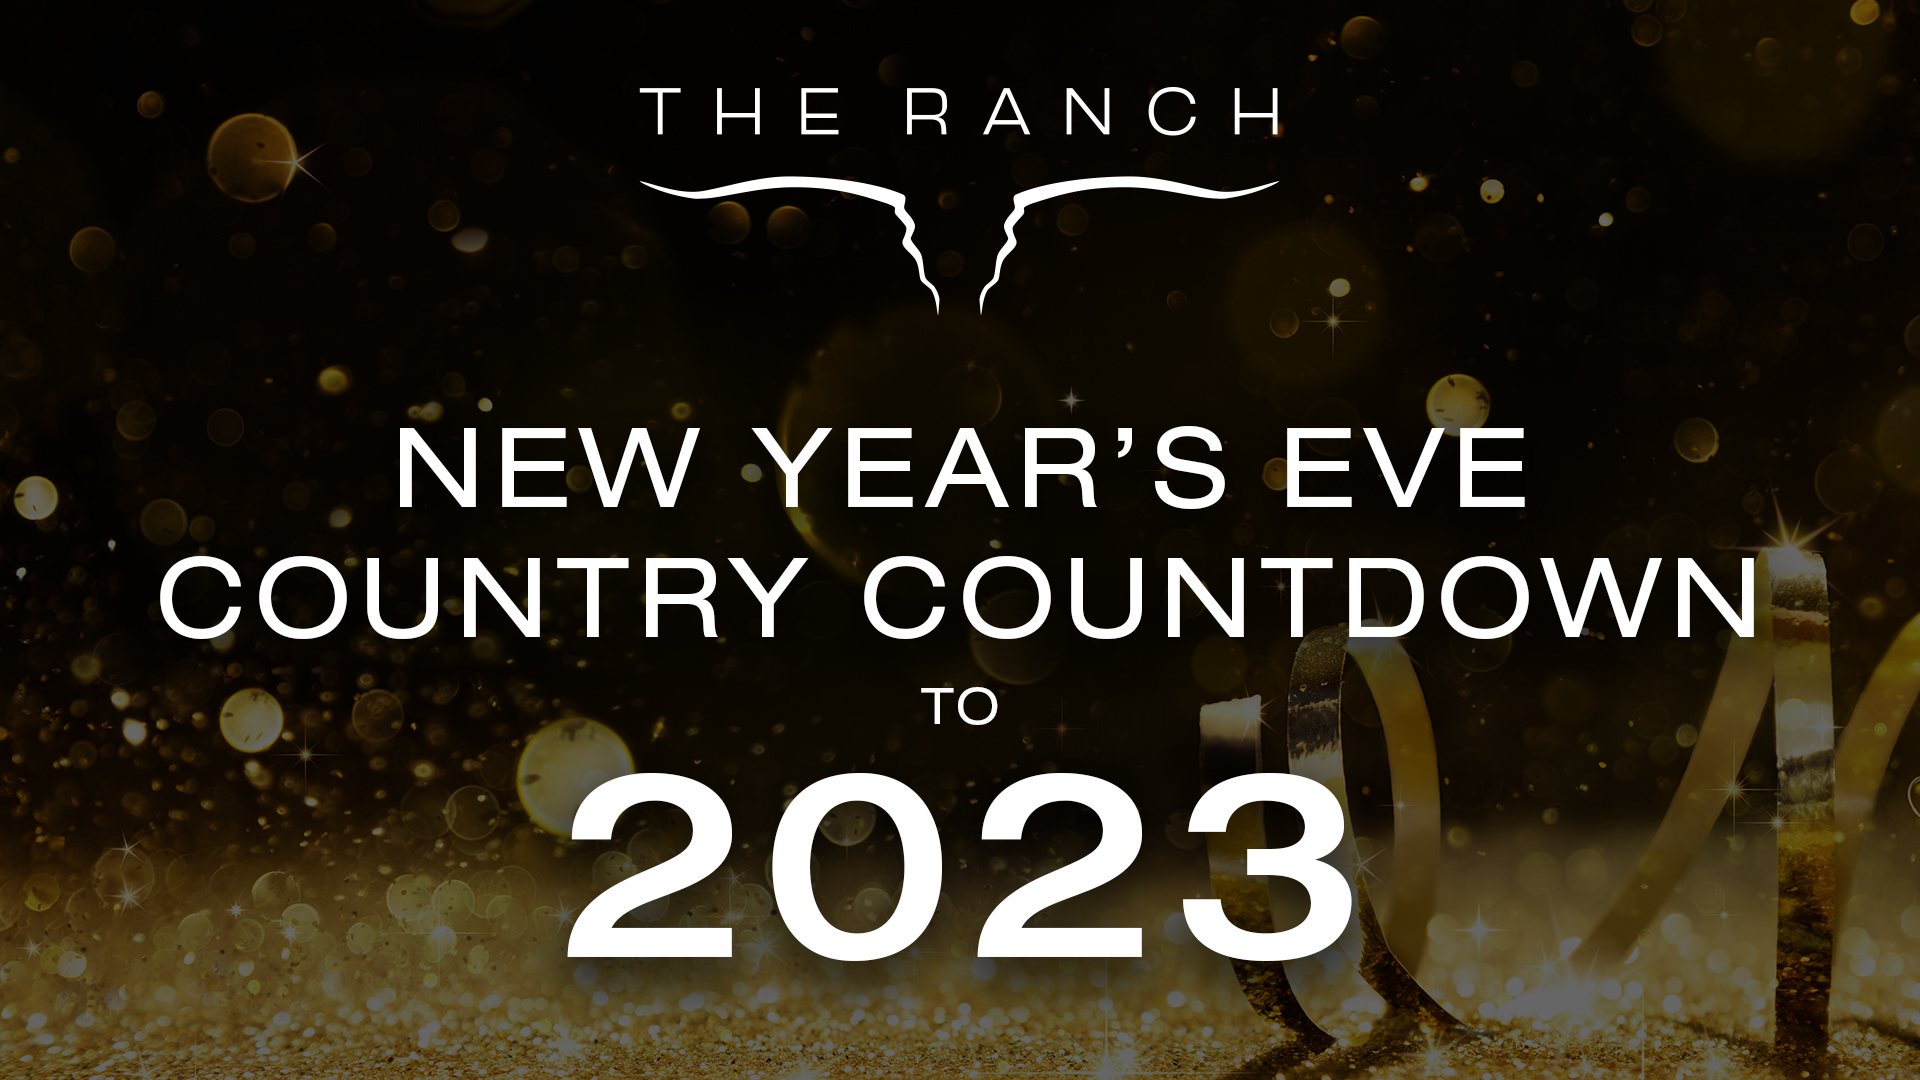 THE RANCH Saloon New Year's Eve 2022 Concert Event with the Cross County Line December 31st, 2022